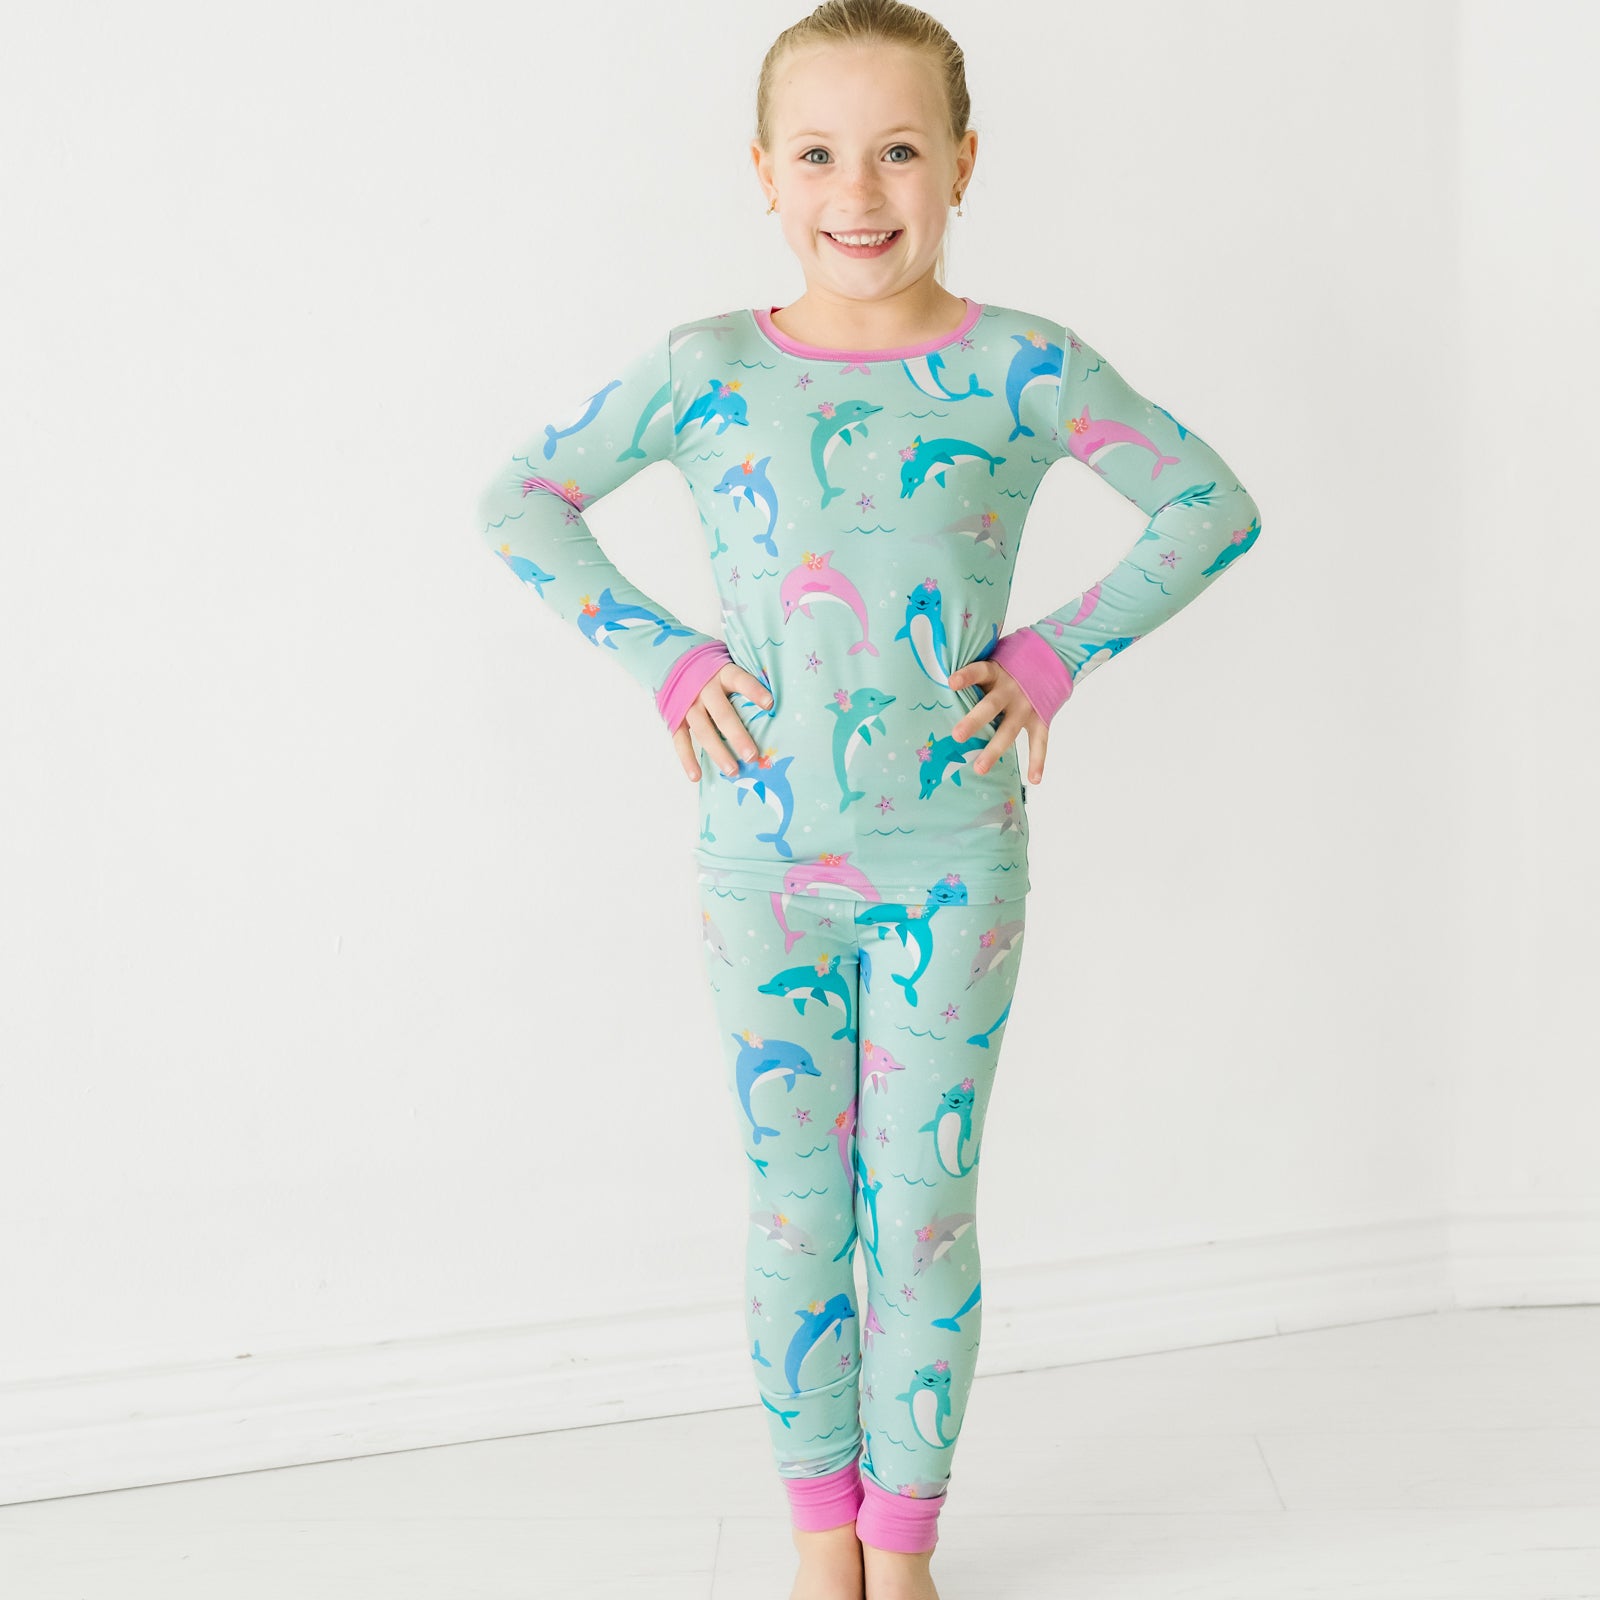 Child wearing a Dolphin Dance two-piece pajama set